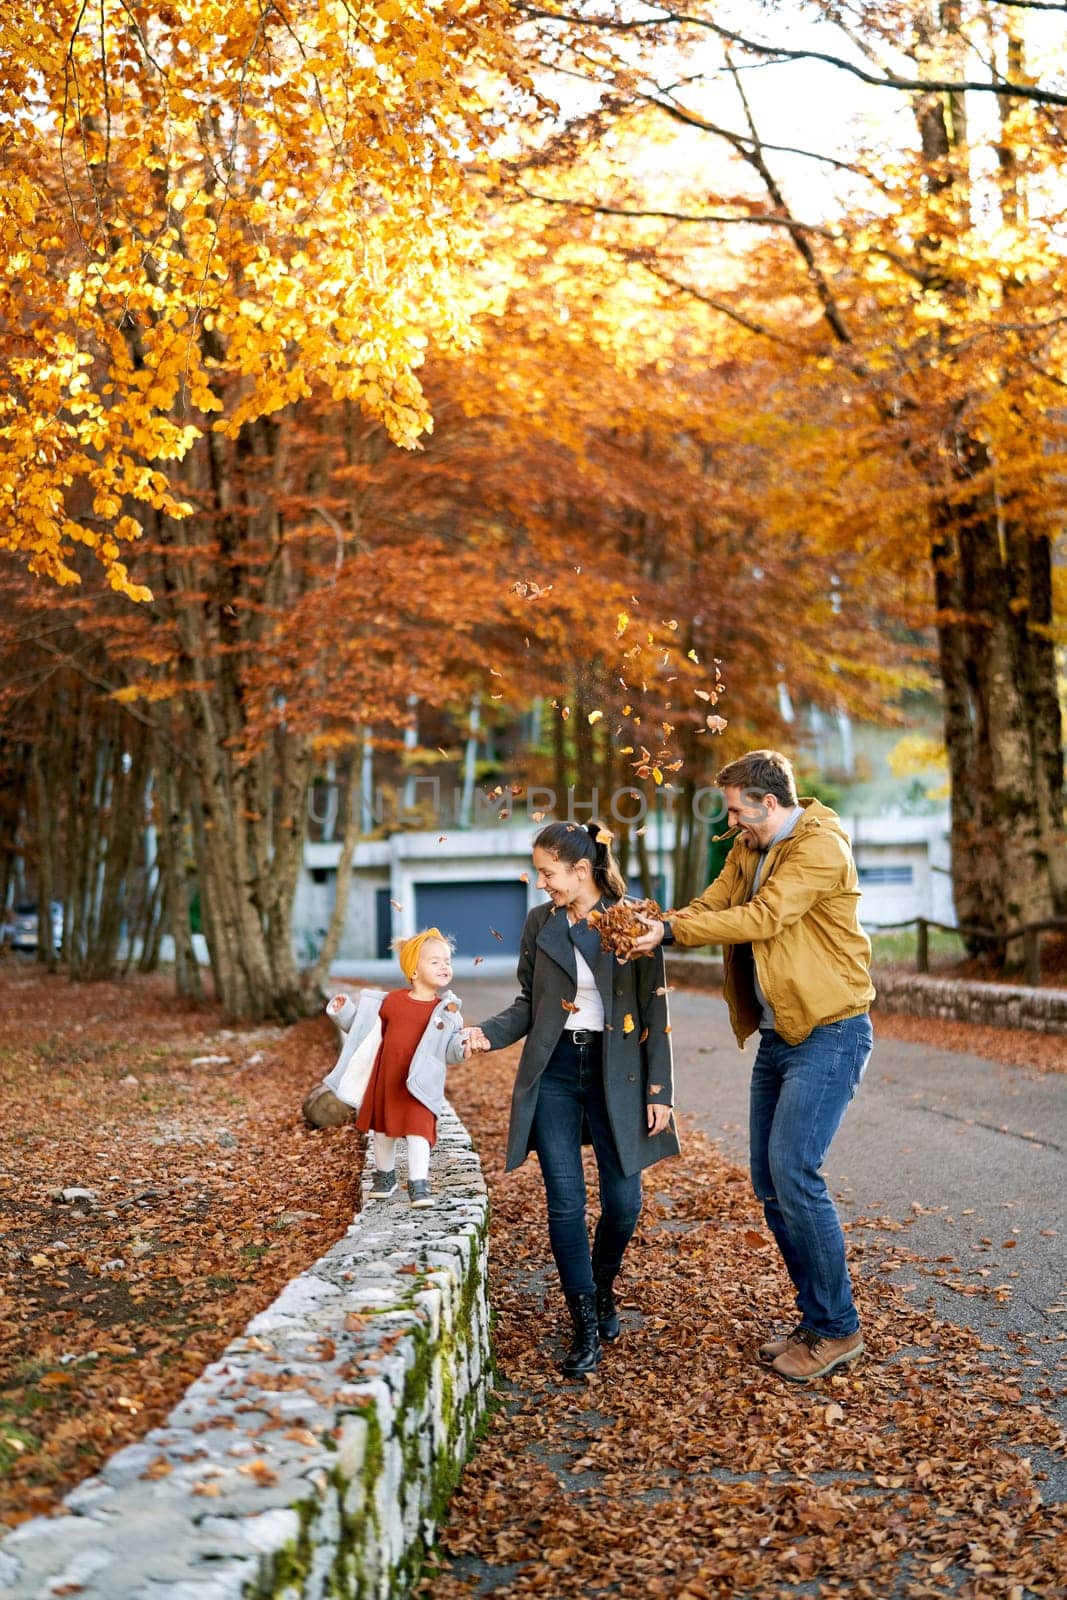 Laughing dad throws up dry leaves over mom and little girl walking through the autumn forest by Nadtochiy